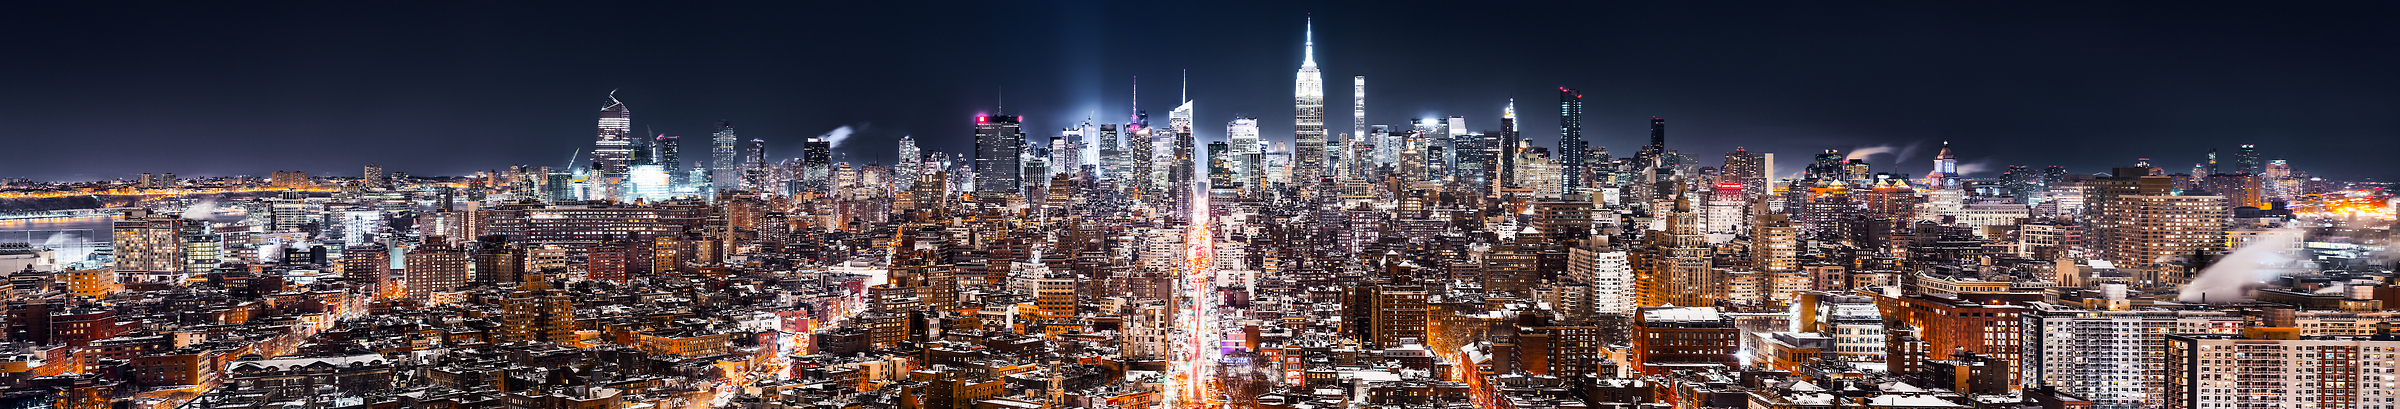 4,636 megapixels! A very high resolution, large-format panorama photo of the New York City skyline at night; cityscape fine art photo created by Dan Piech in Midtown Manhattan, New York City.